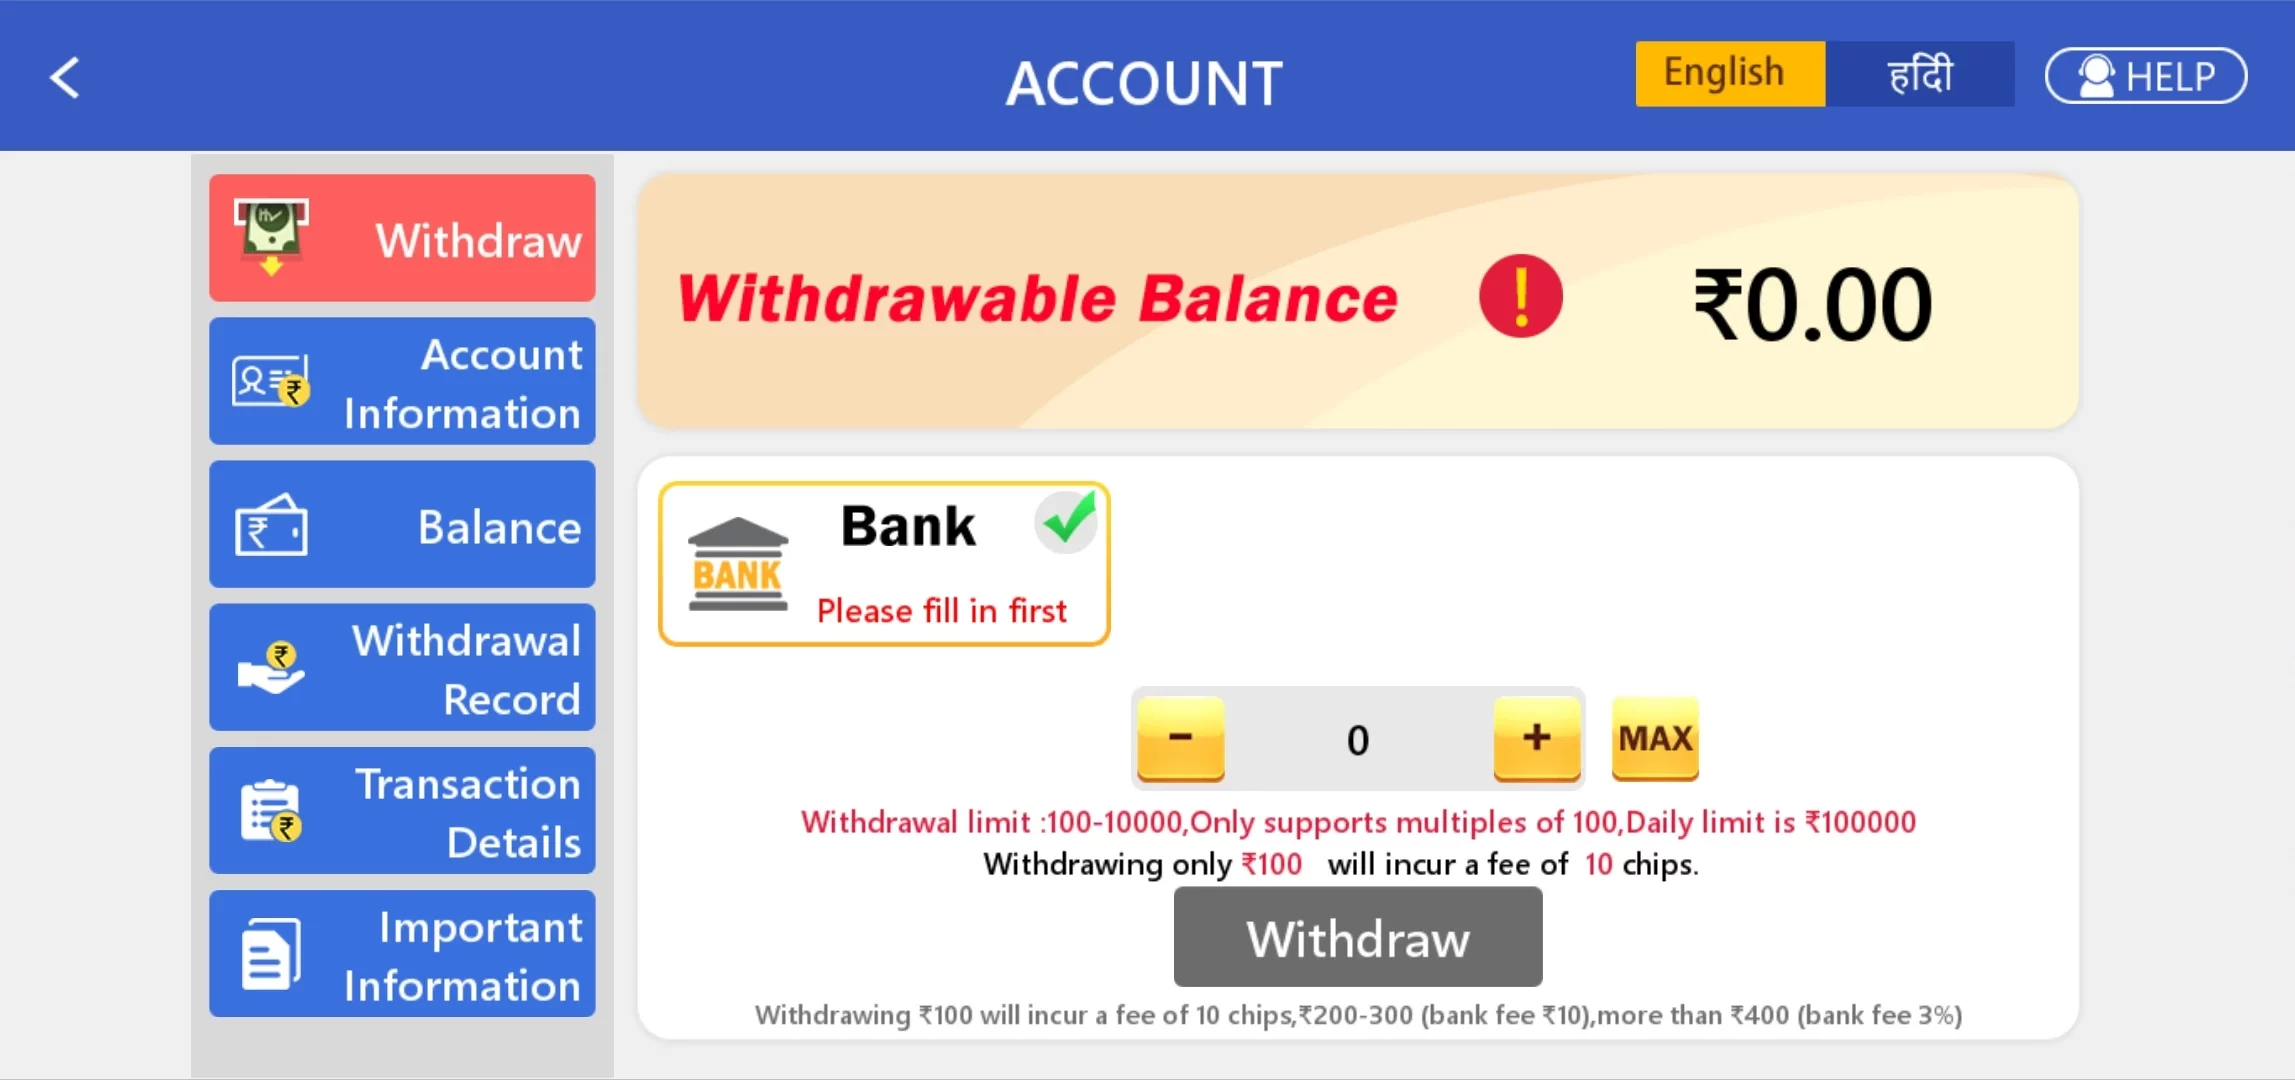 How To Withdraw Money From Real Teen Patti App